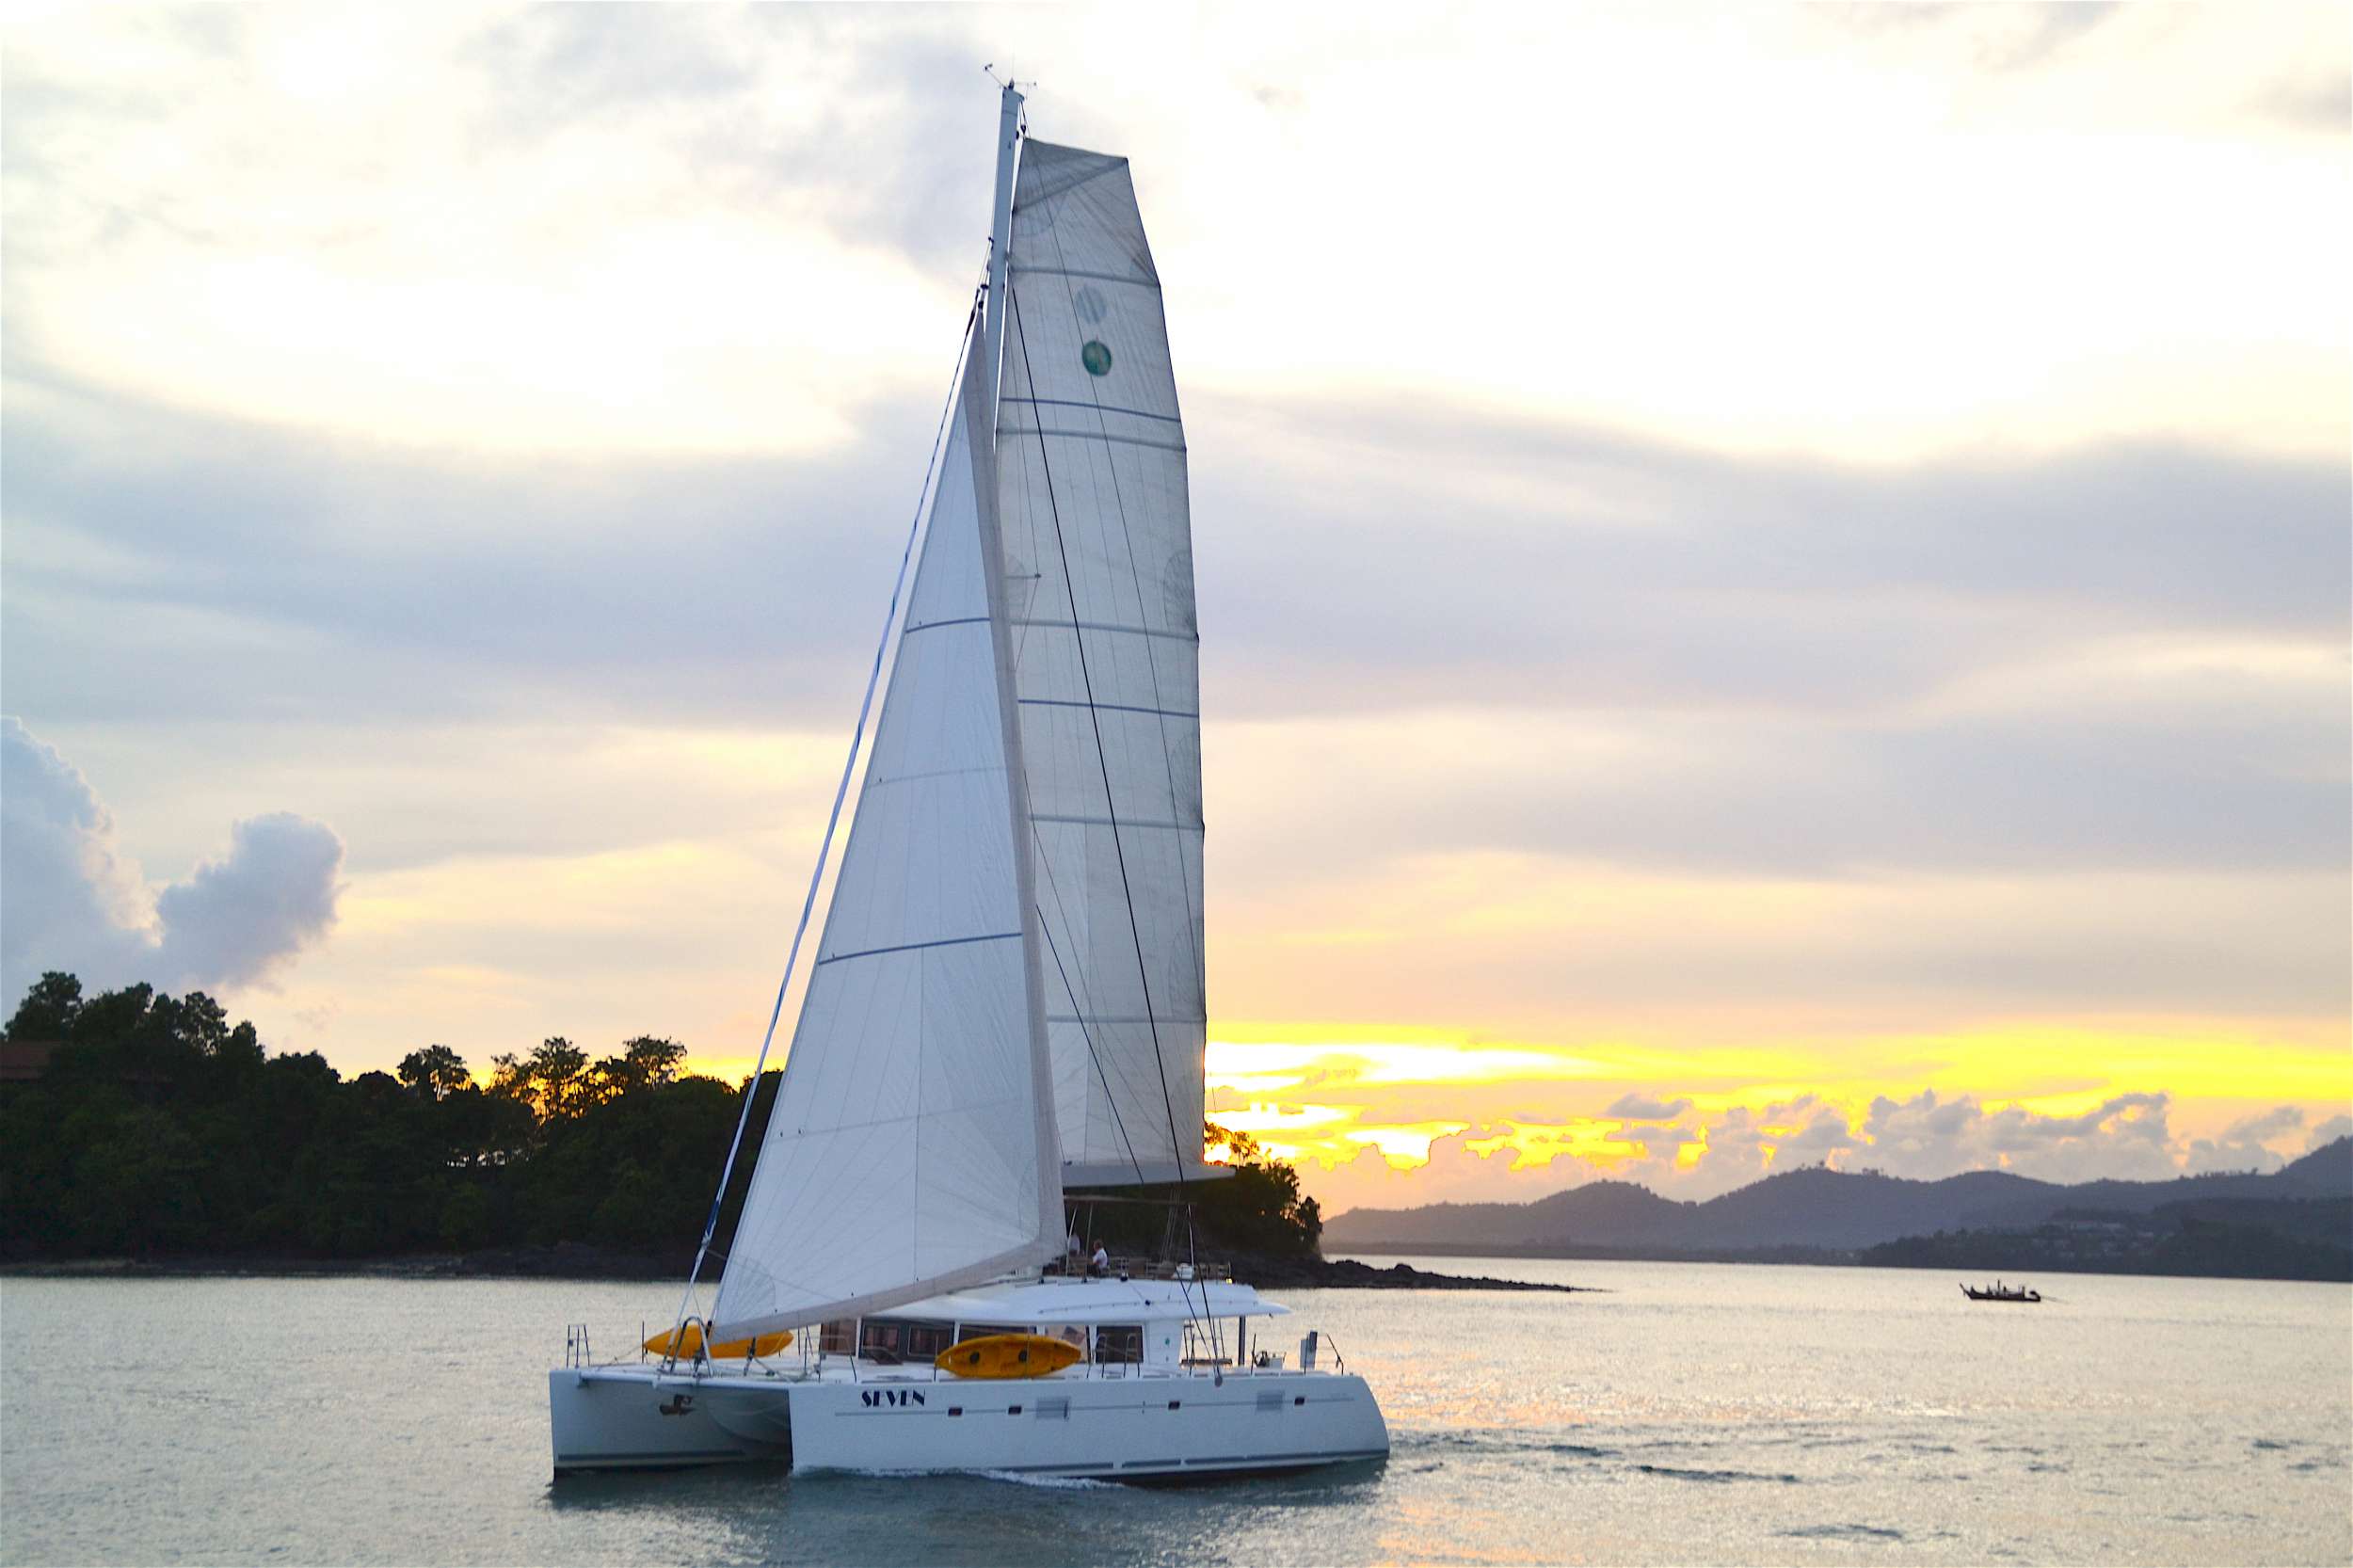 00SEVEN - Yacht Charter Langkawi & Boat hire in SE Asia 2